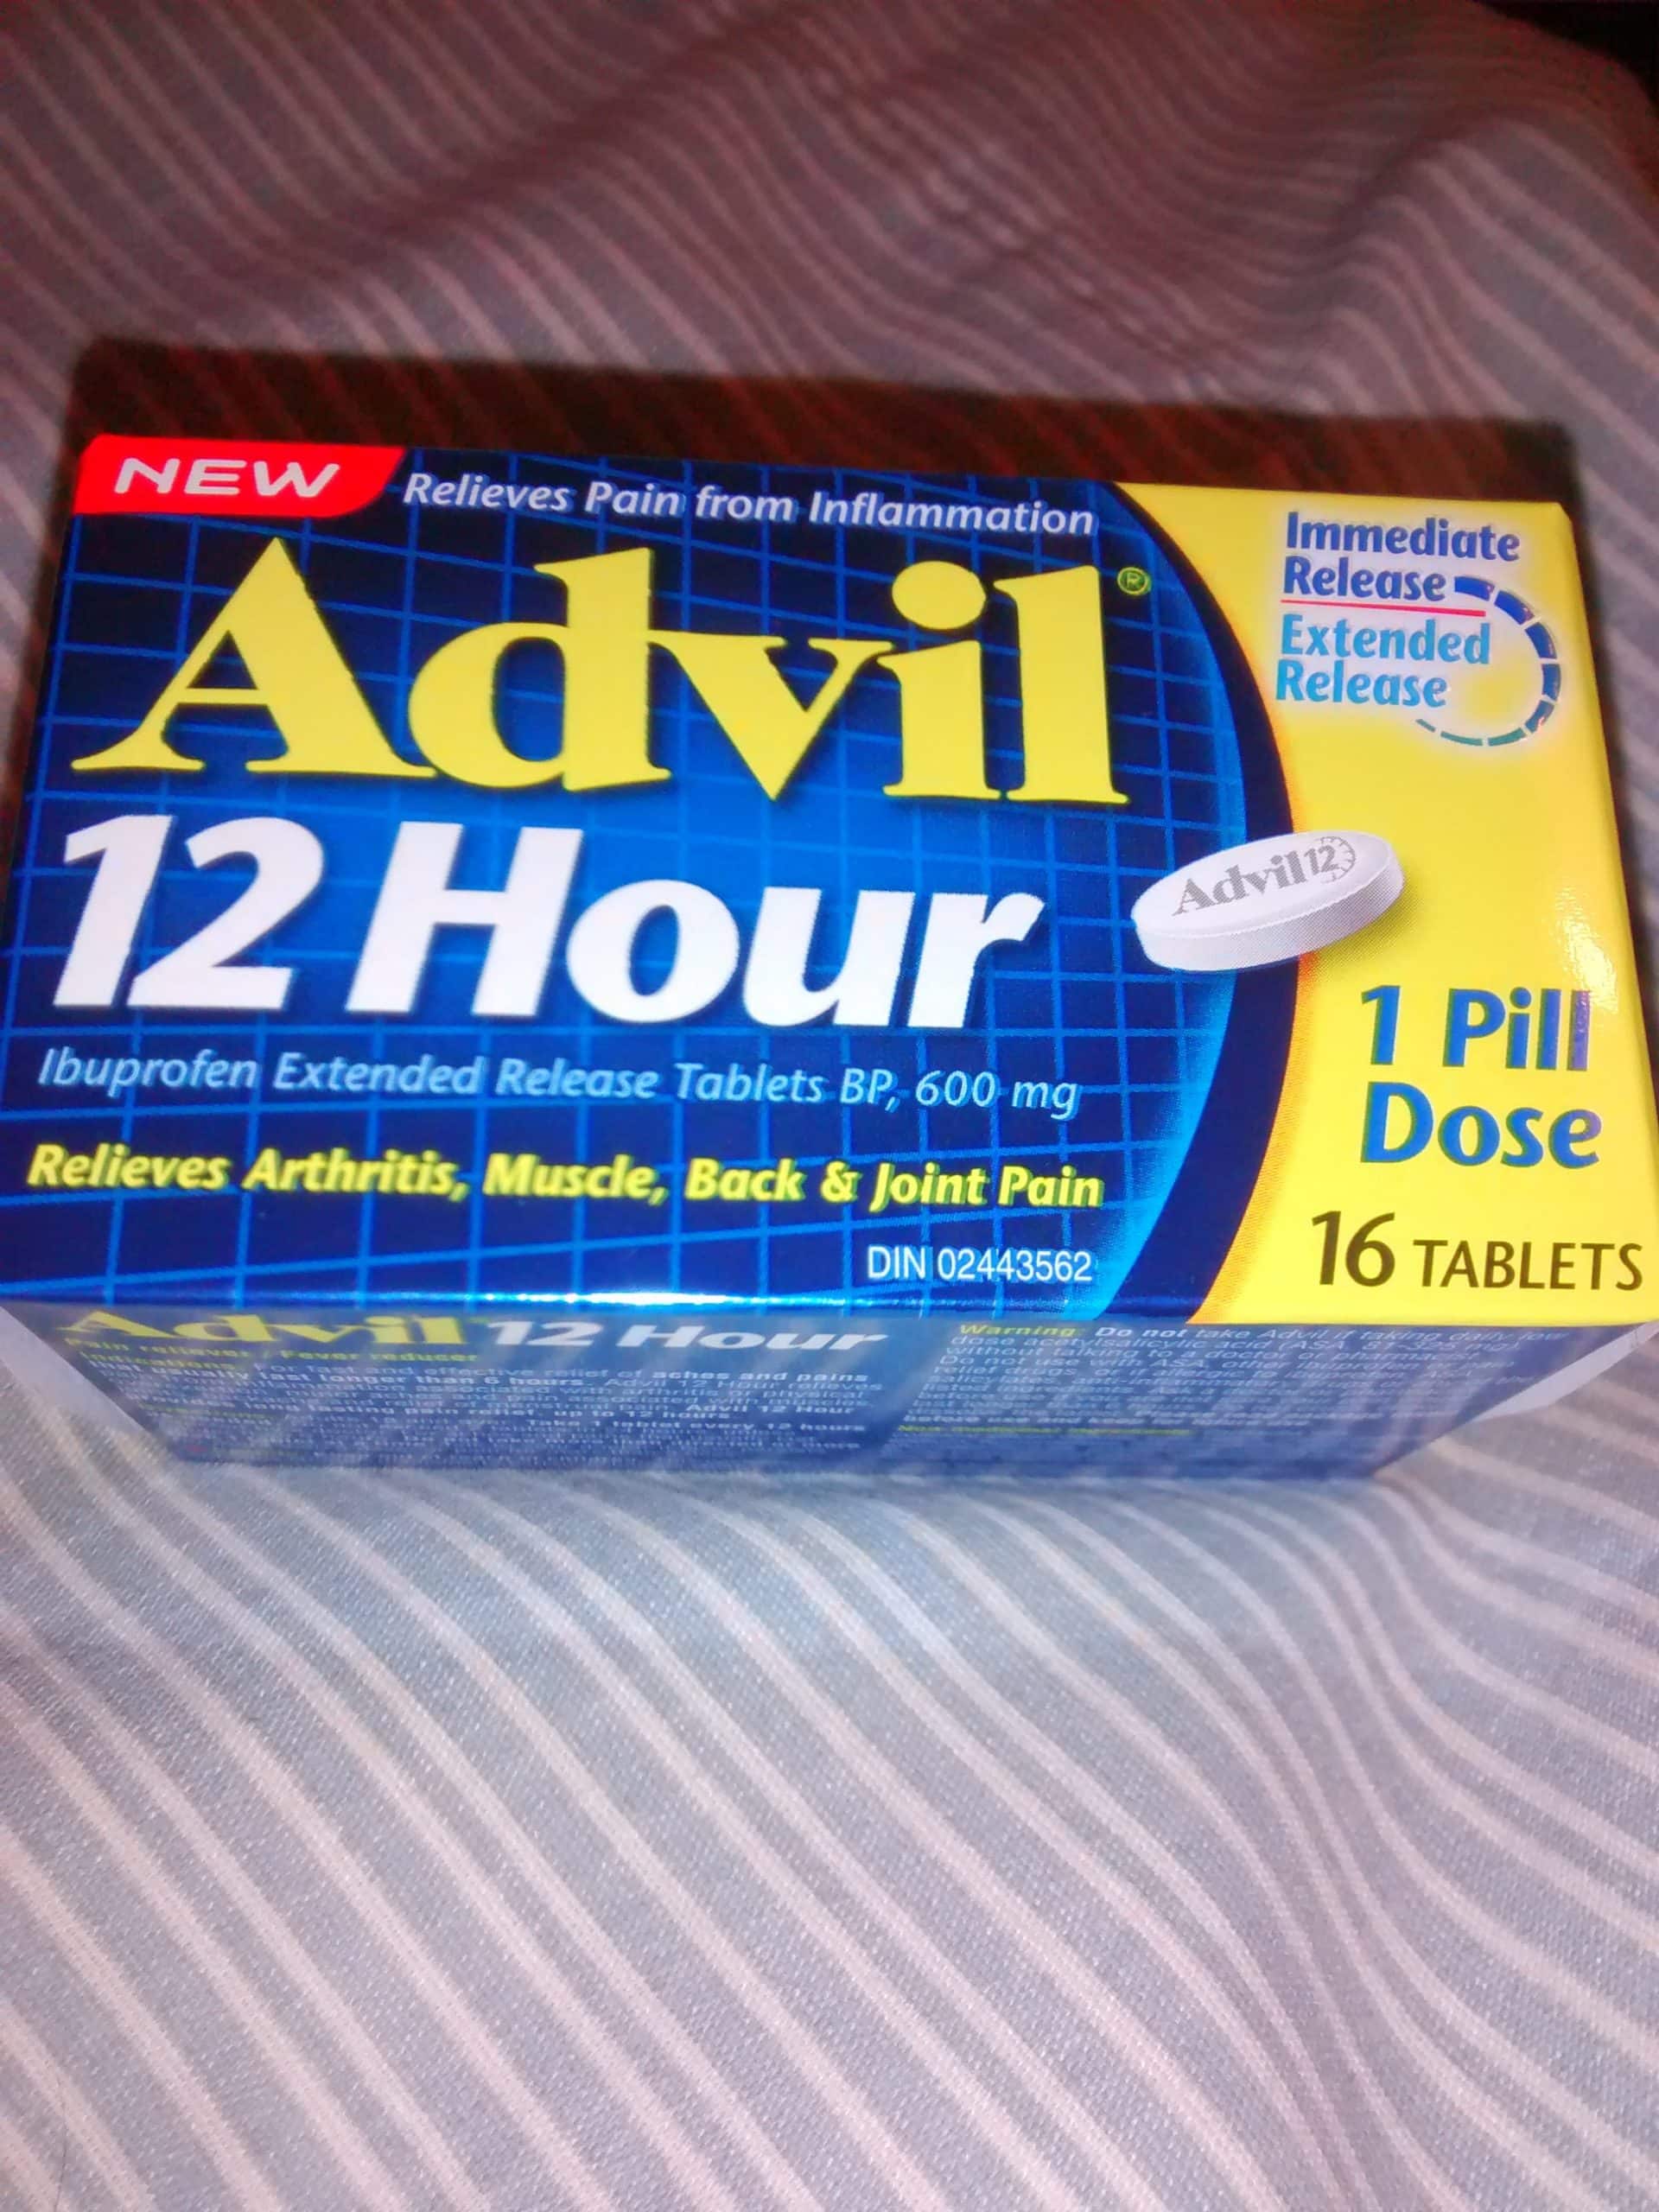 Advil 12 Hour Tablets reviews in Pain Relief